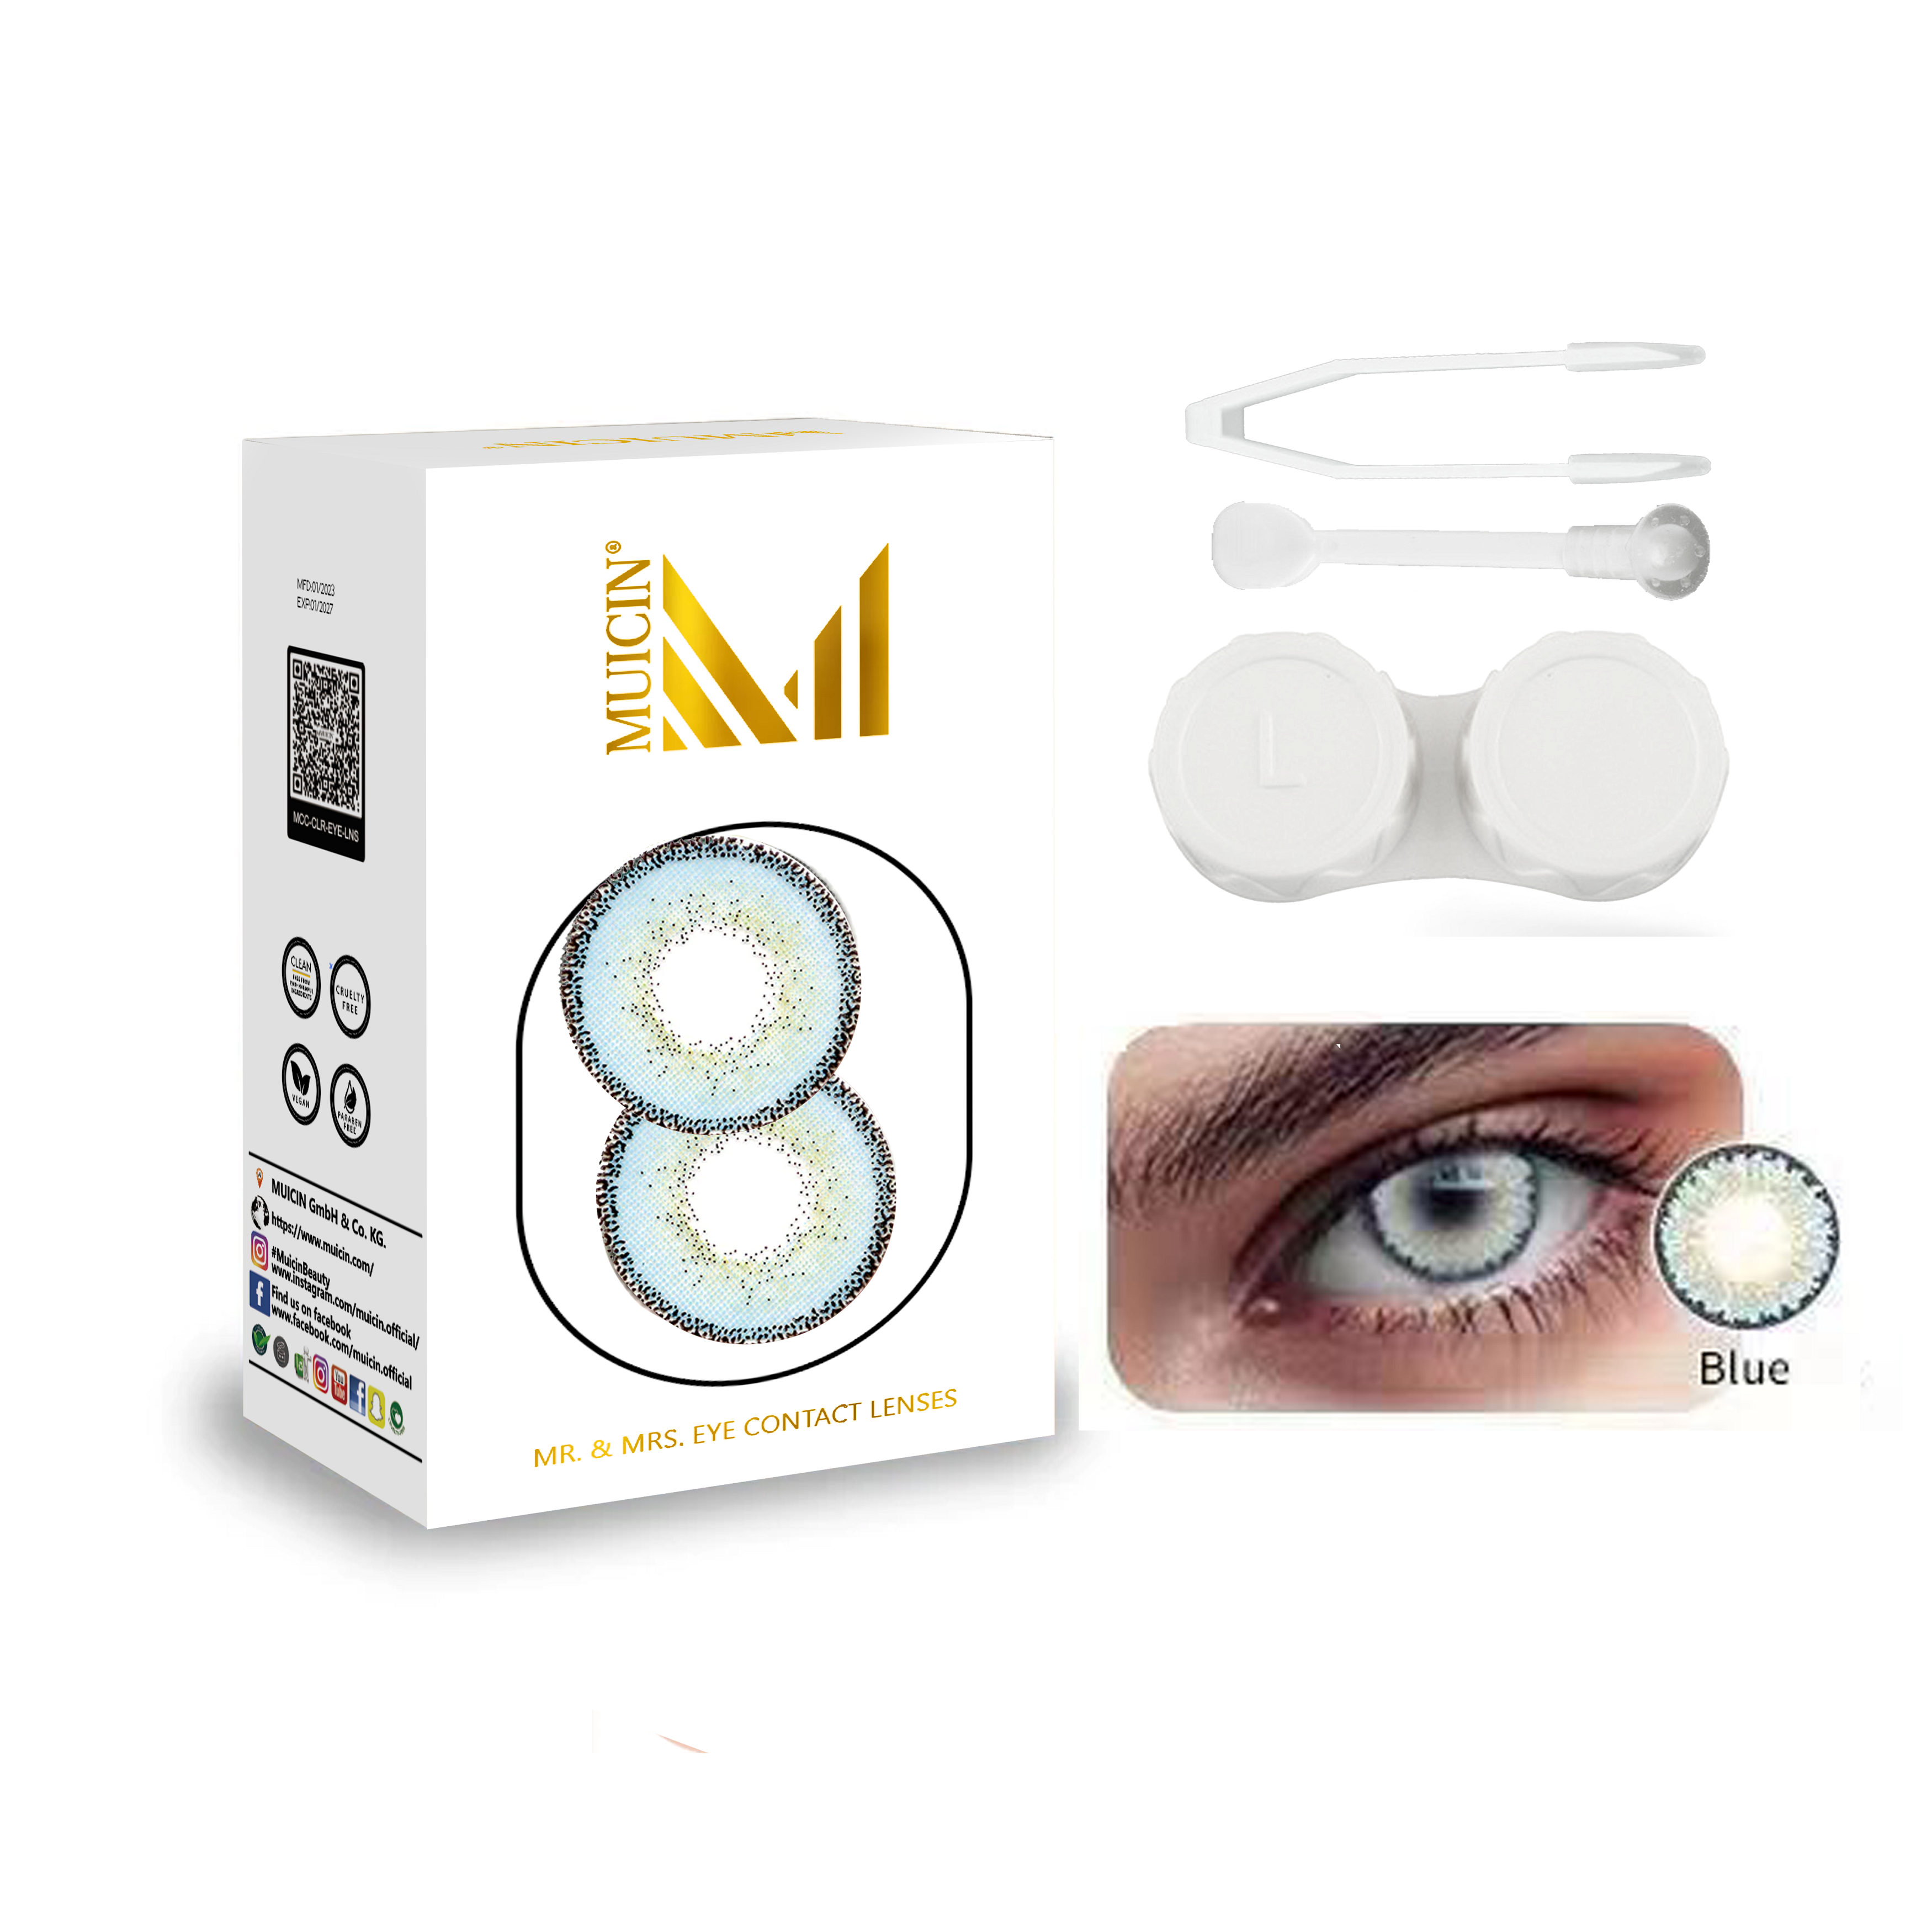 MR &amp; MRS PARTY WEAR COLORED EYE CONTACTS - VIBRANT EYE TRANSFORMATION